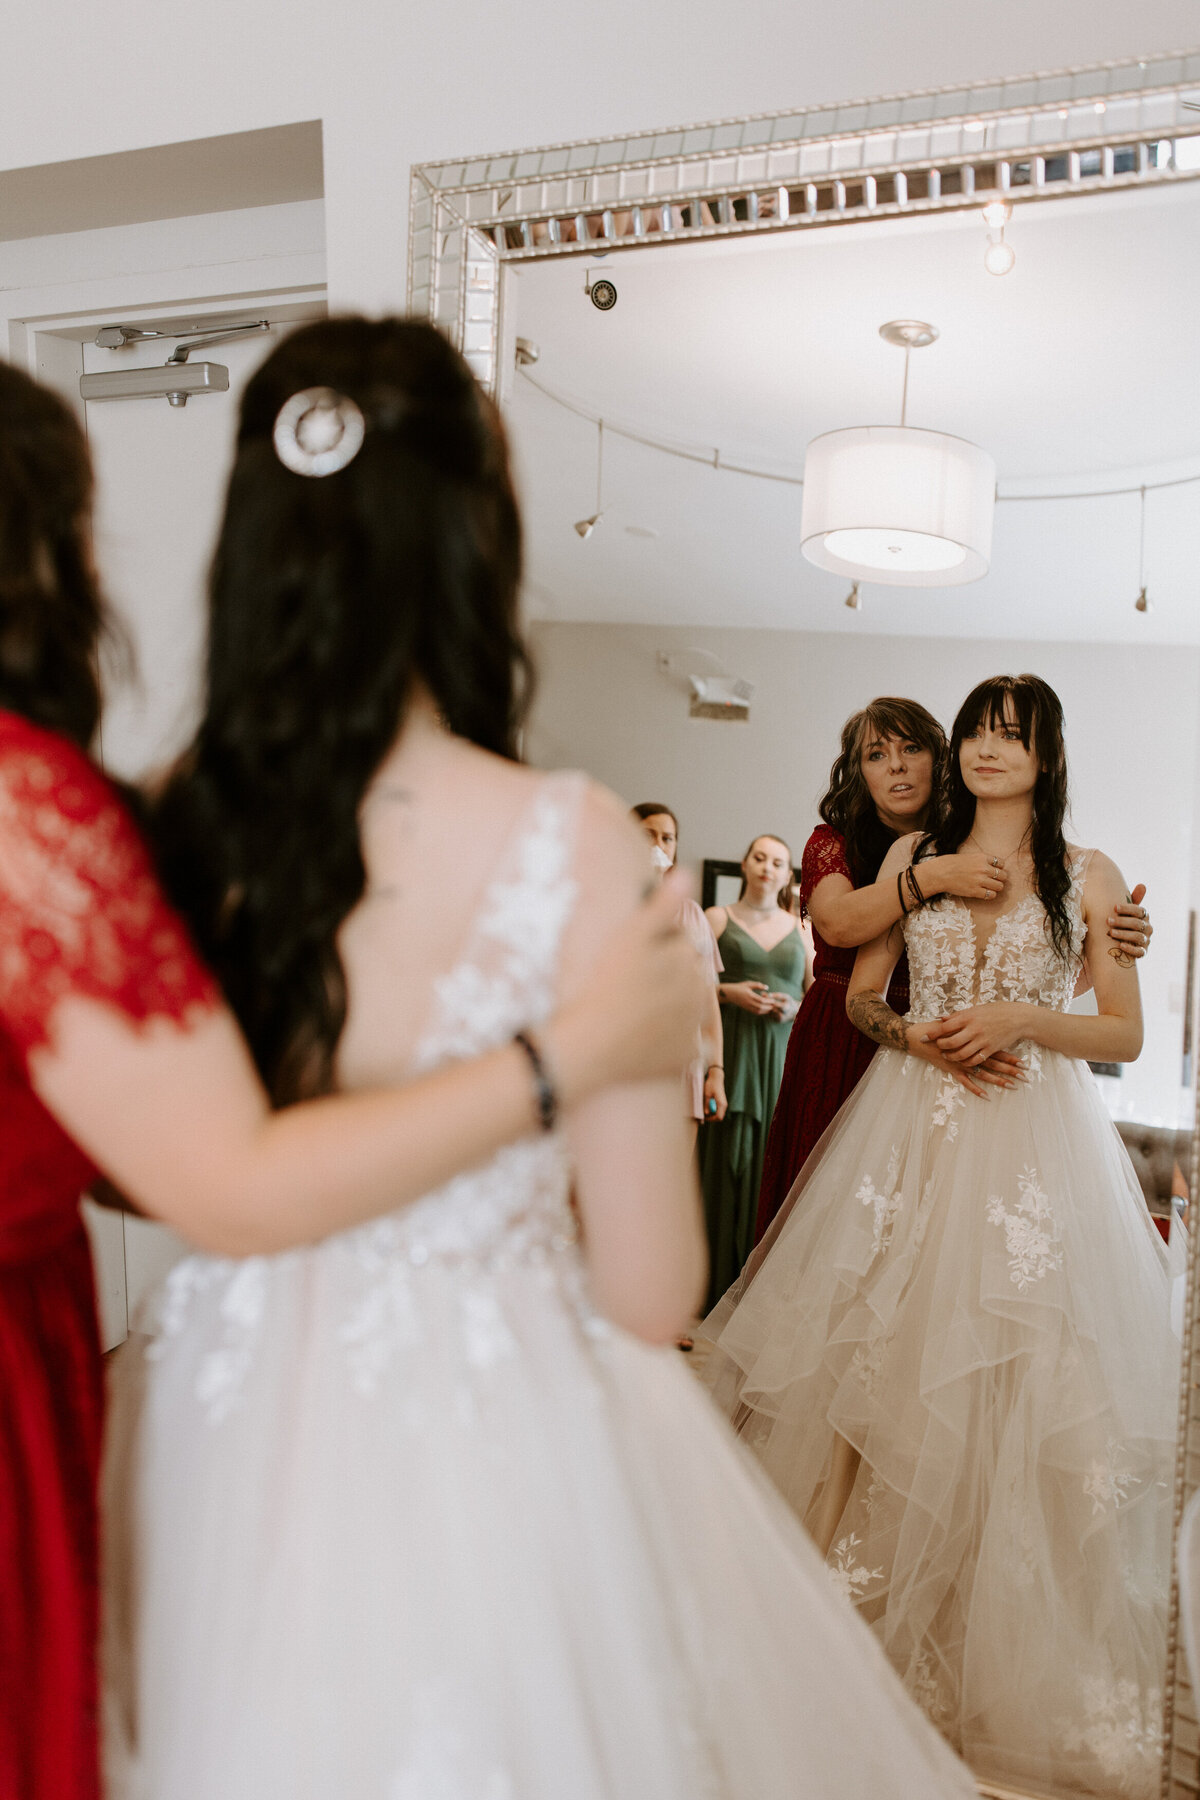 reflection of a person helping a bride adjust her dress